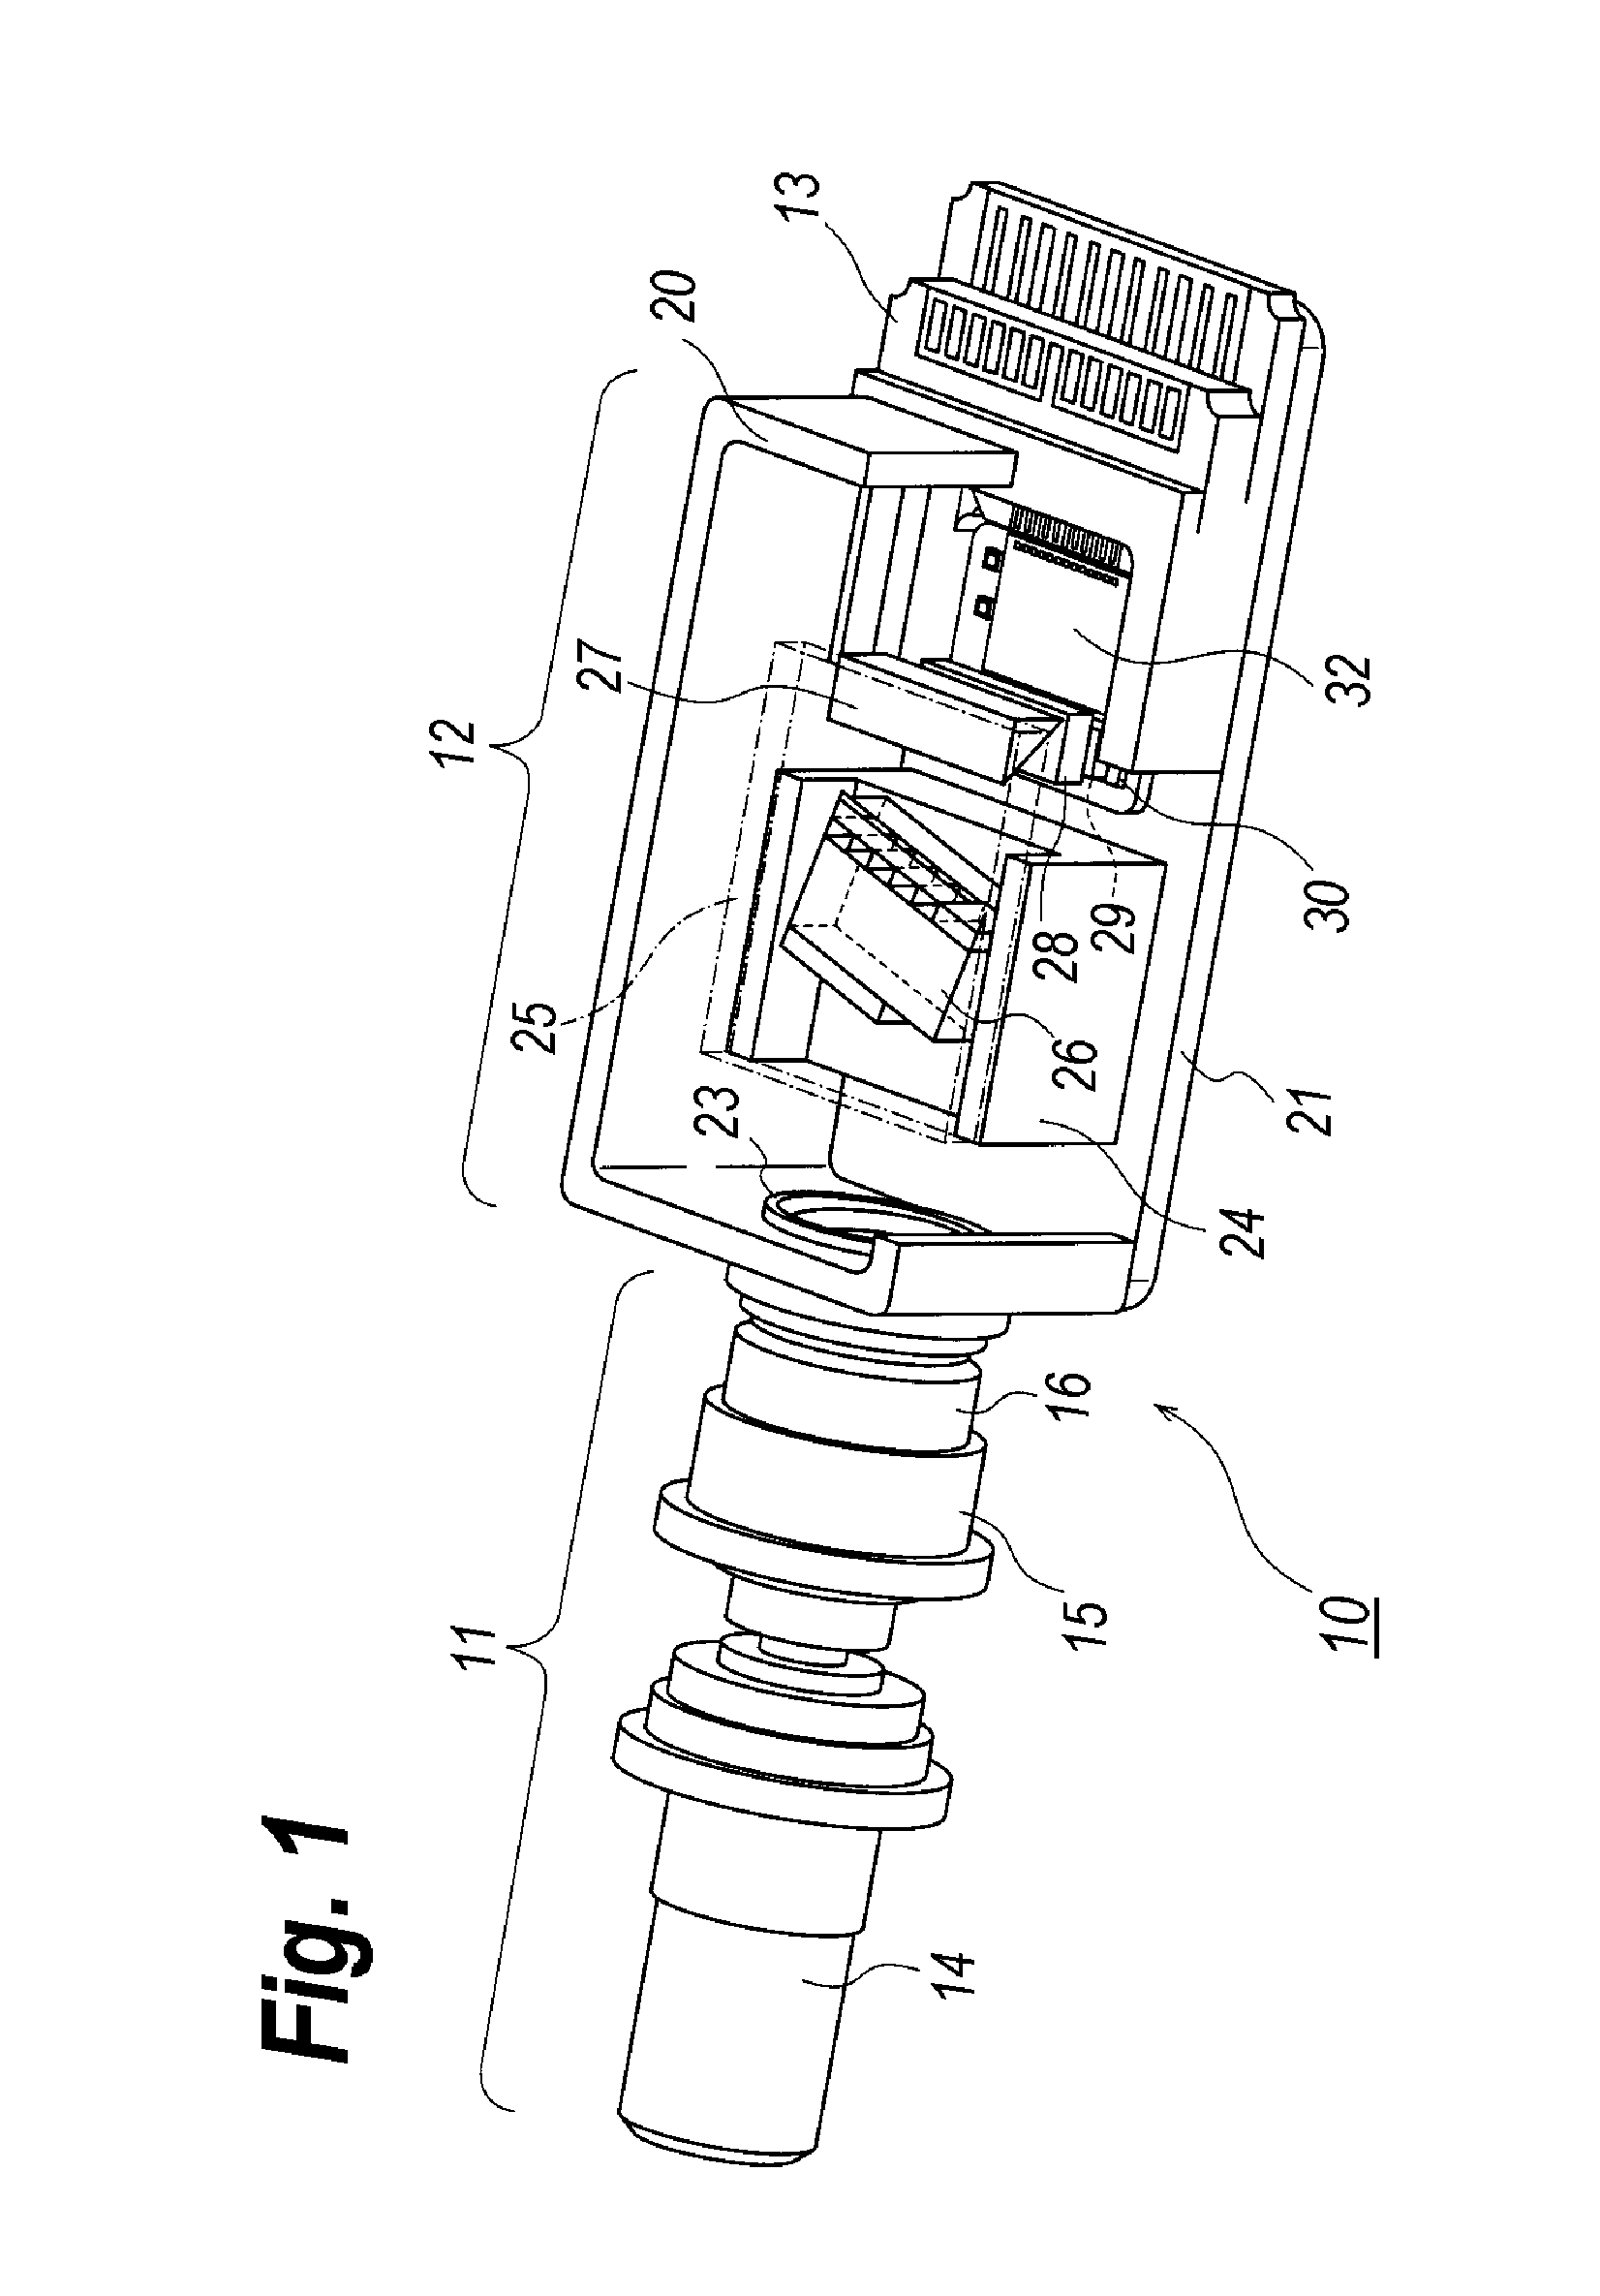 Receiver optical module for receiving wavelength multiplexed optical signals and method to assemble the same